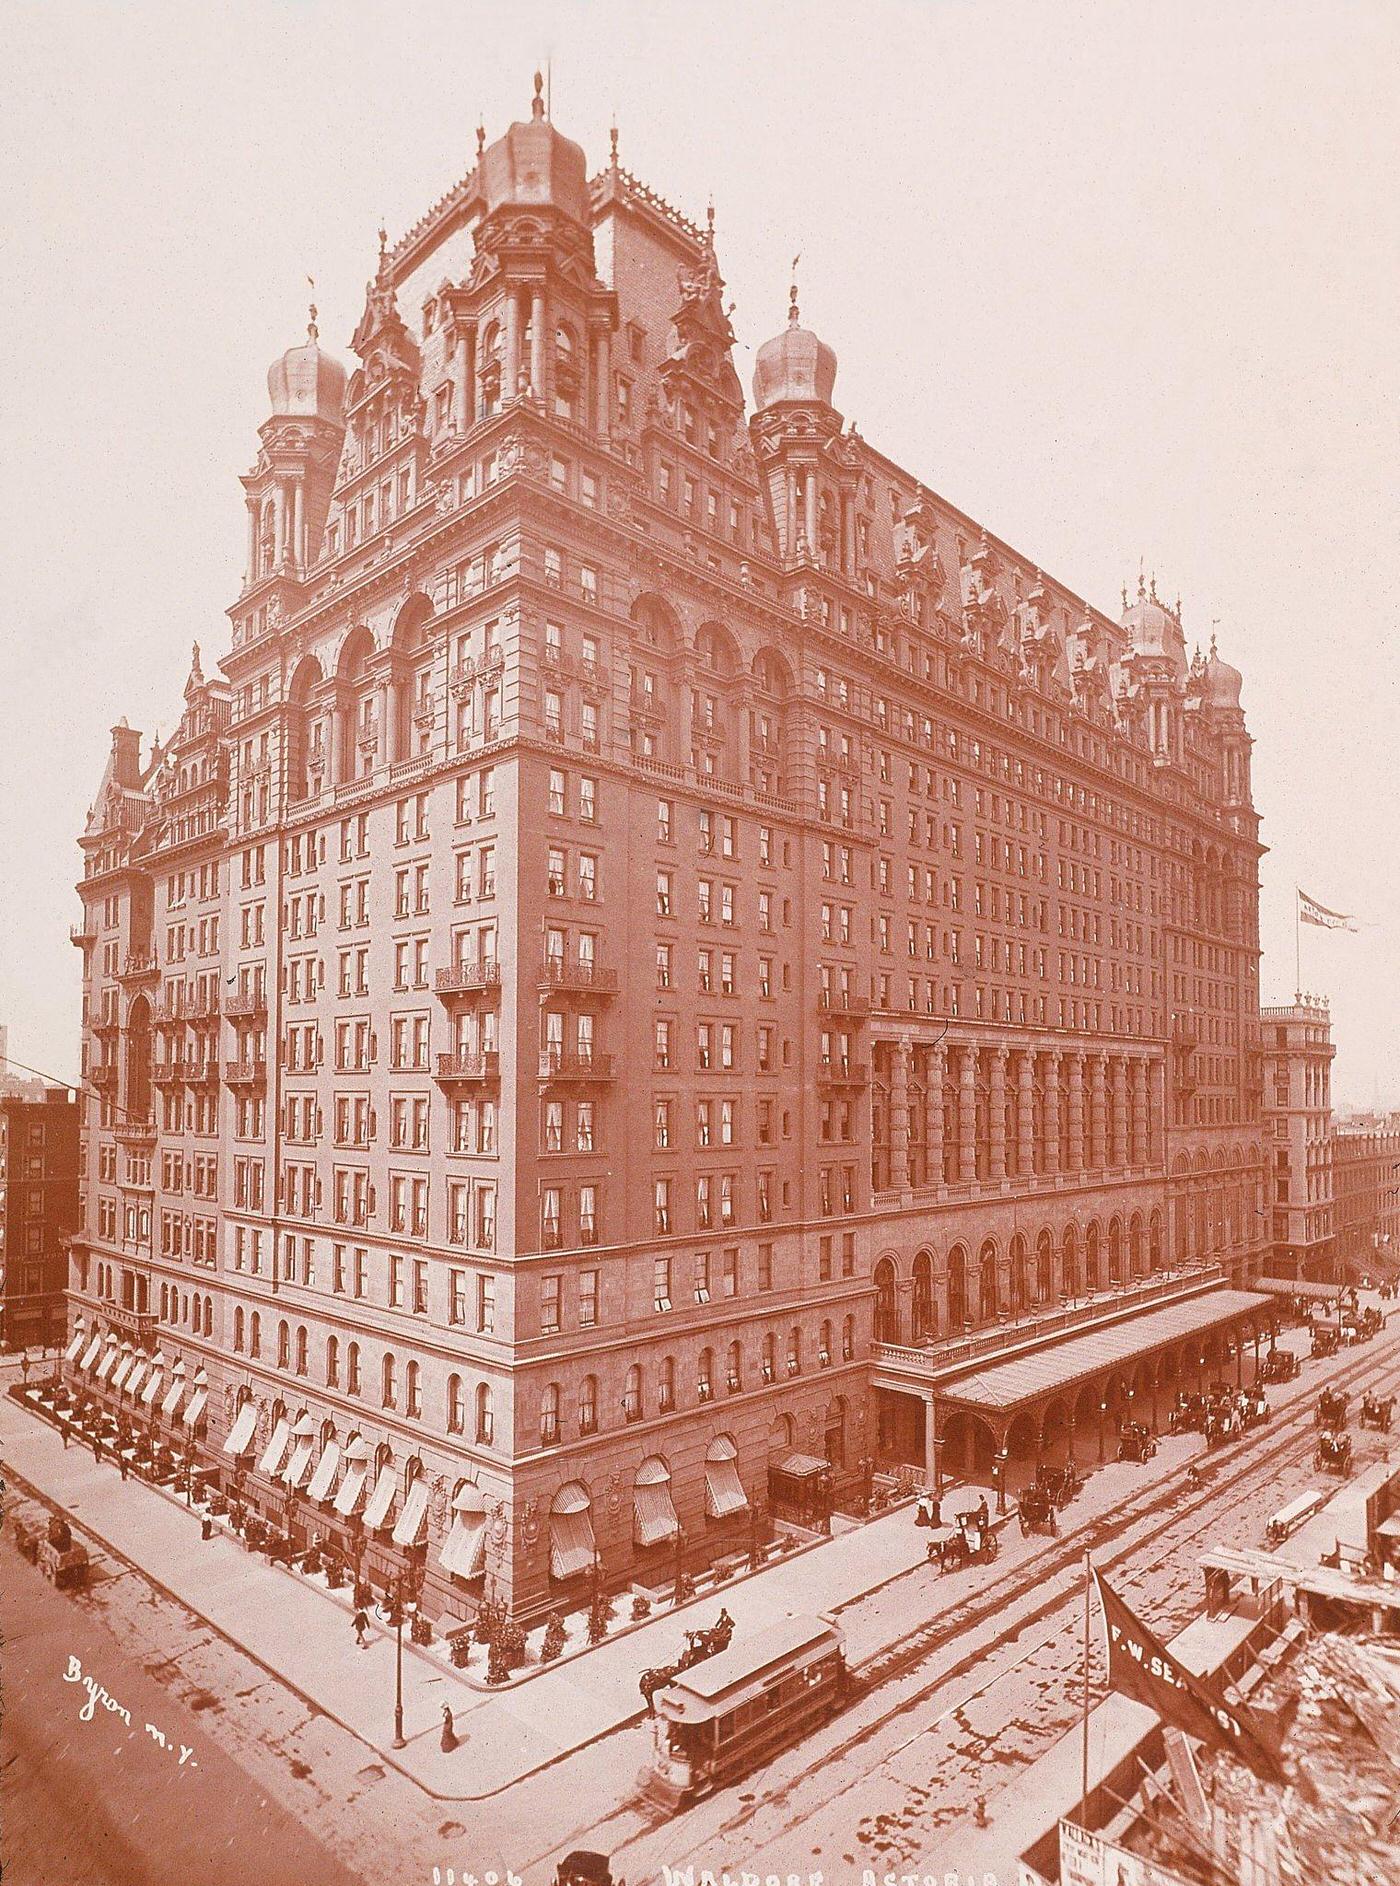 The Former Waldorf Astoria Hotel On The Site Now Occupied By The Empire State Building, New York City, Early 1900S